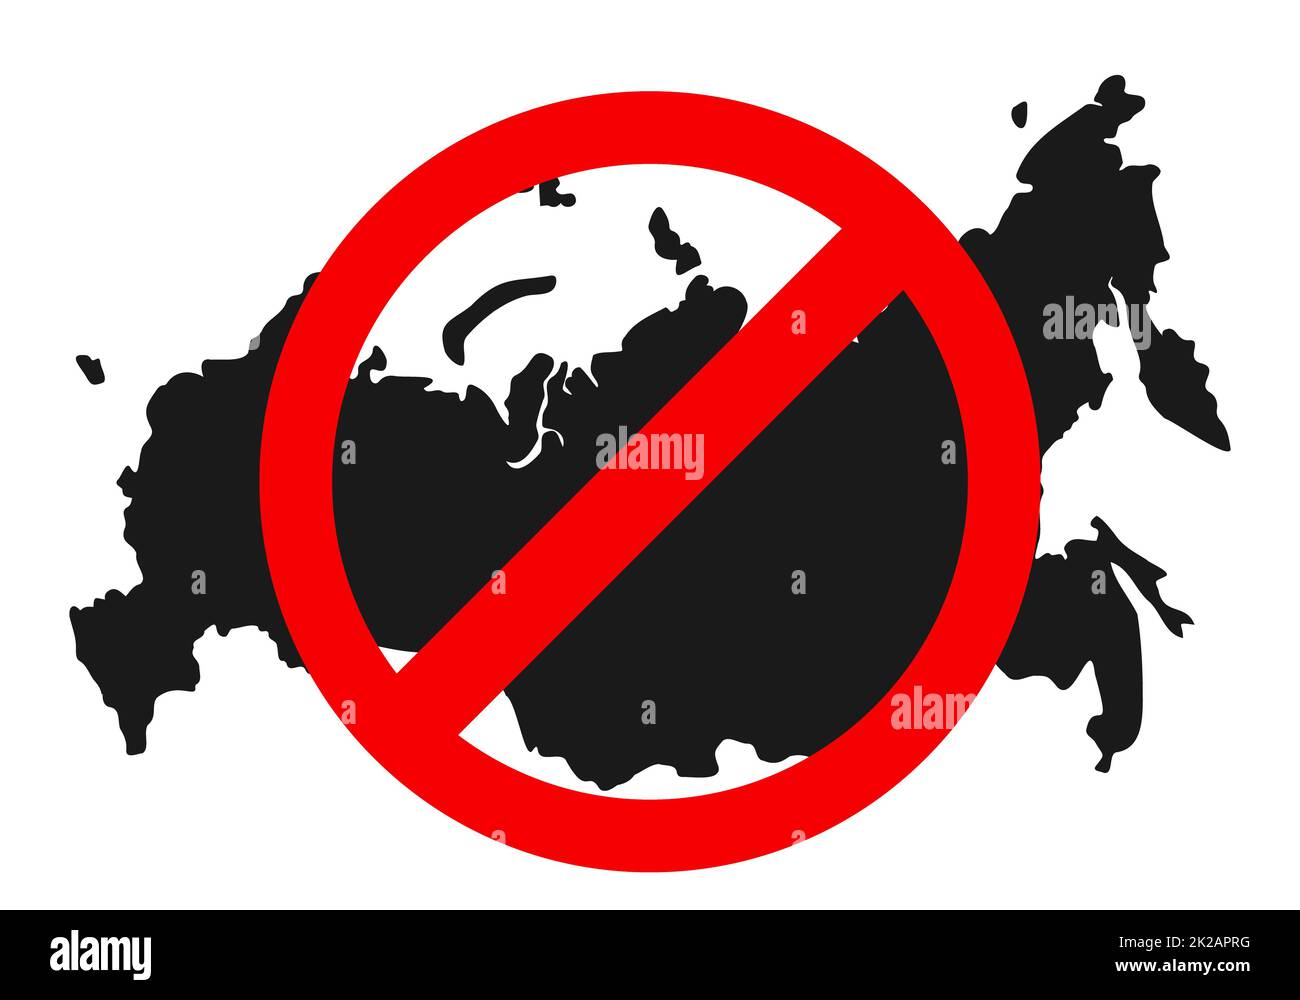 Sanctions against Russian federation. Russia banned. Stop Russian aggressors. Red forbidding sign for Russian countries. Ban russians for flights, goods and bank transfers. The collapse of the state. Stock Photo